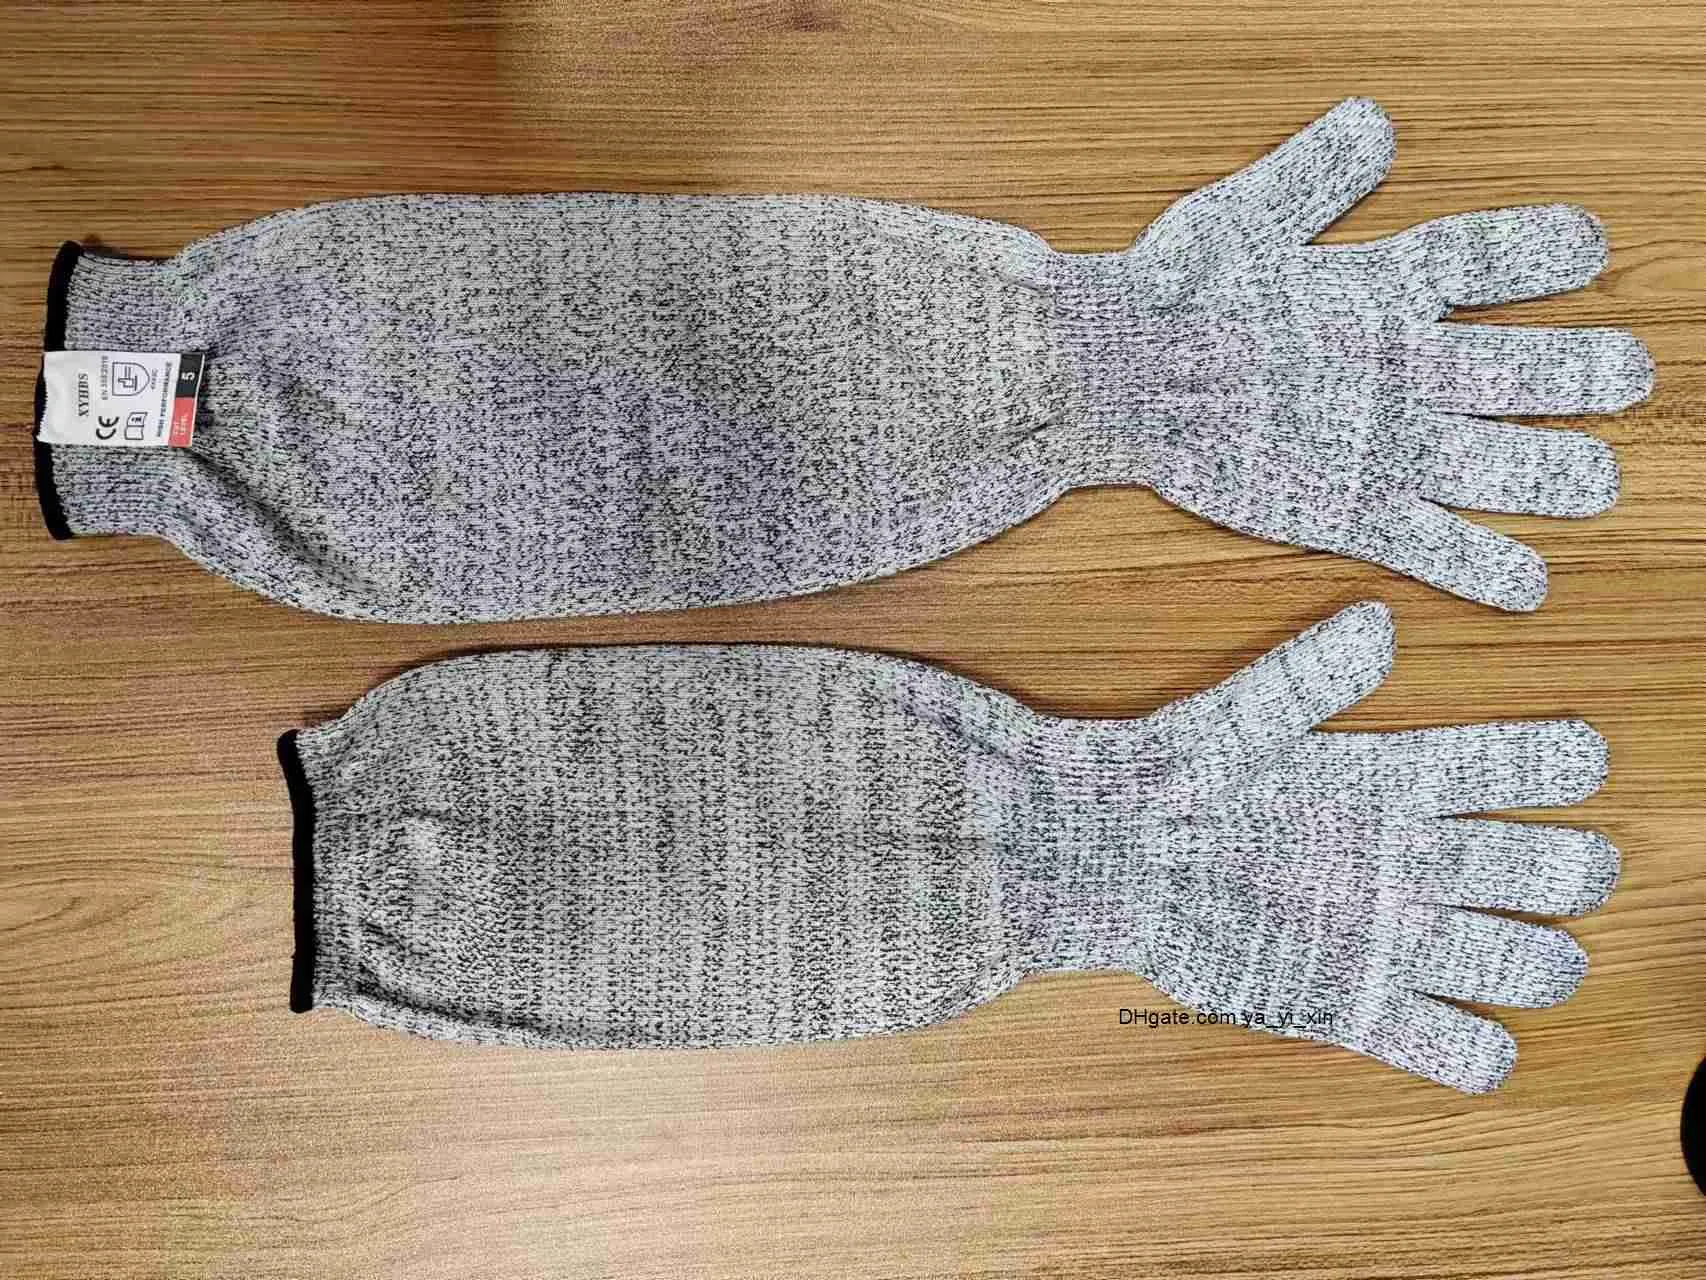 New anti-cutting lengthened arm protection gloves wear-resistant glass factory woodworking anti-scratch sleeve batch